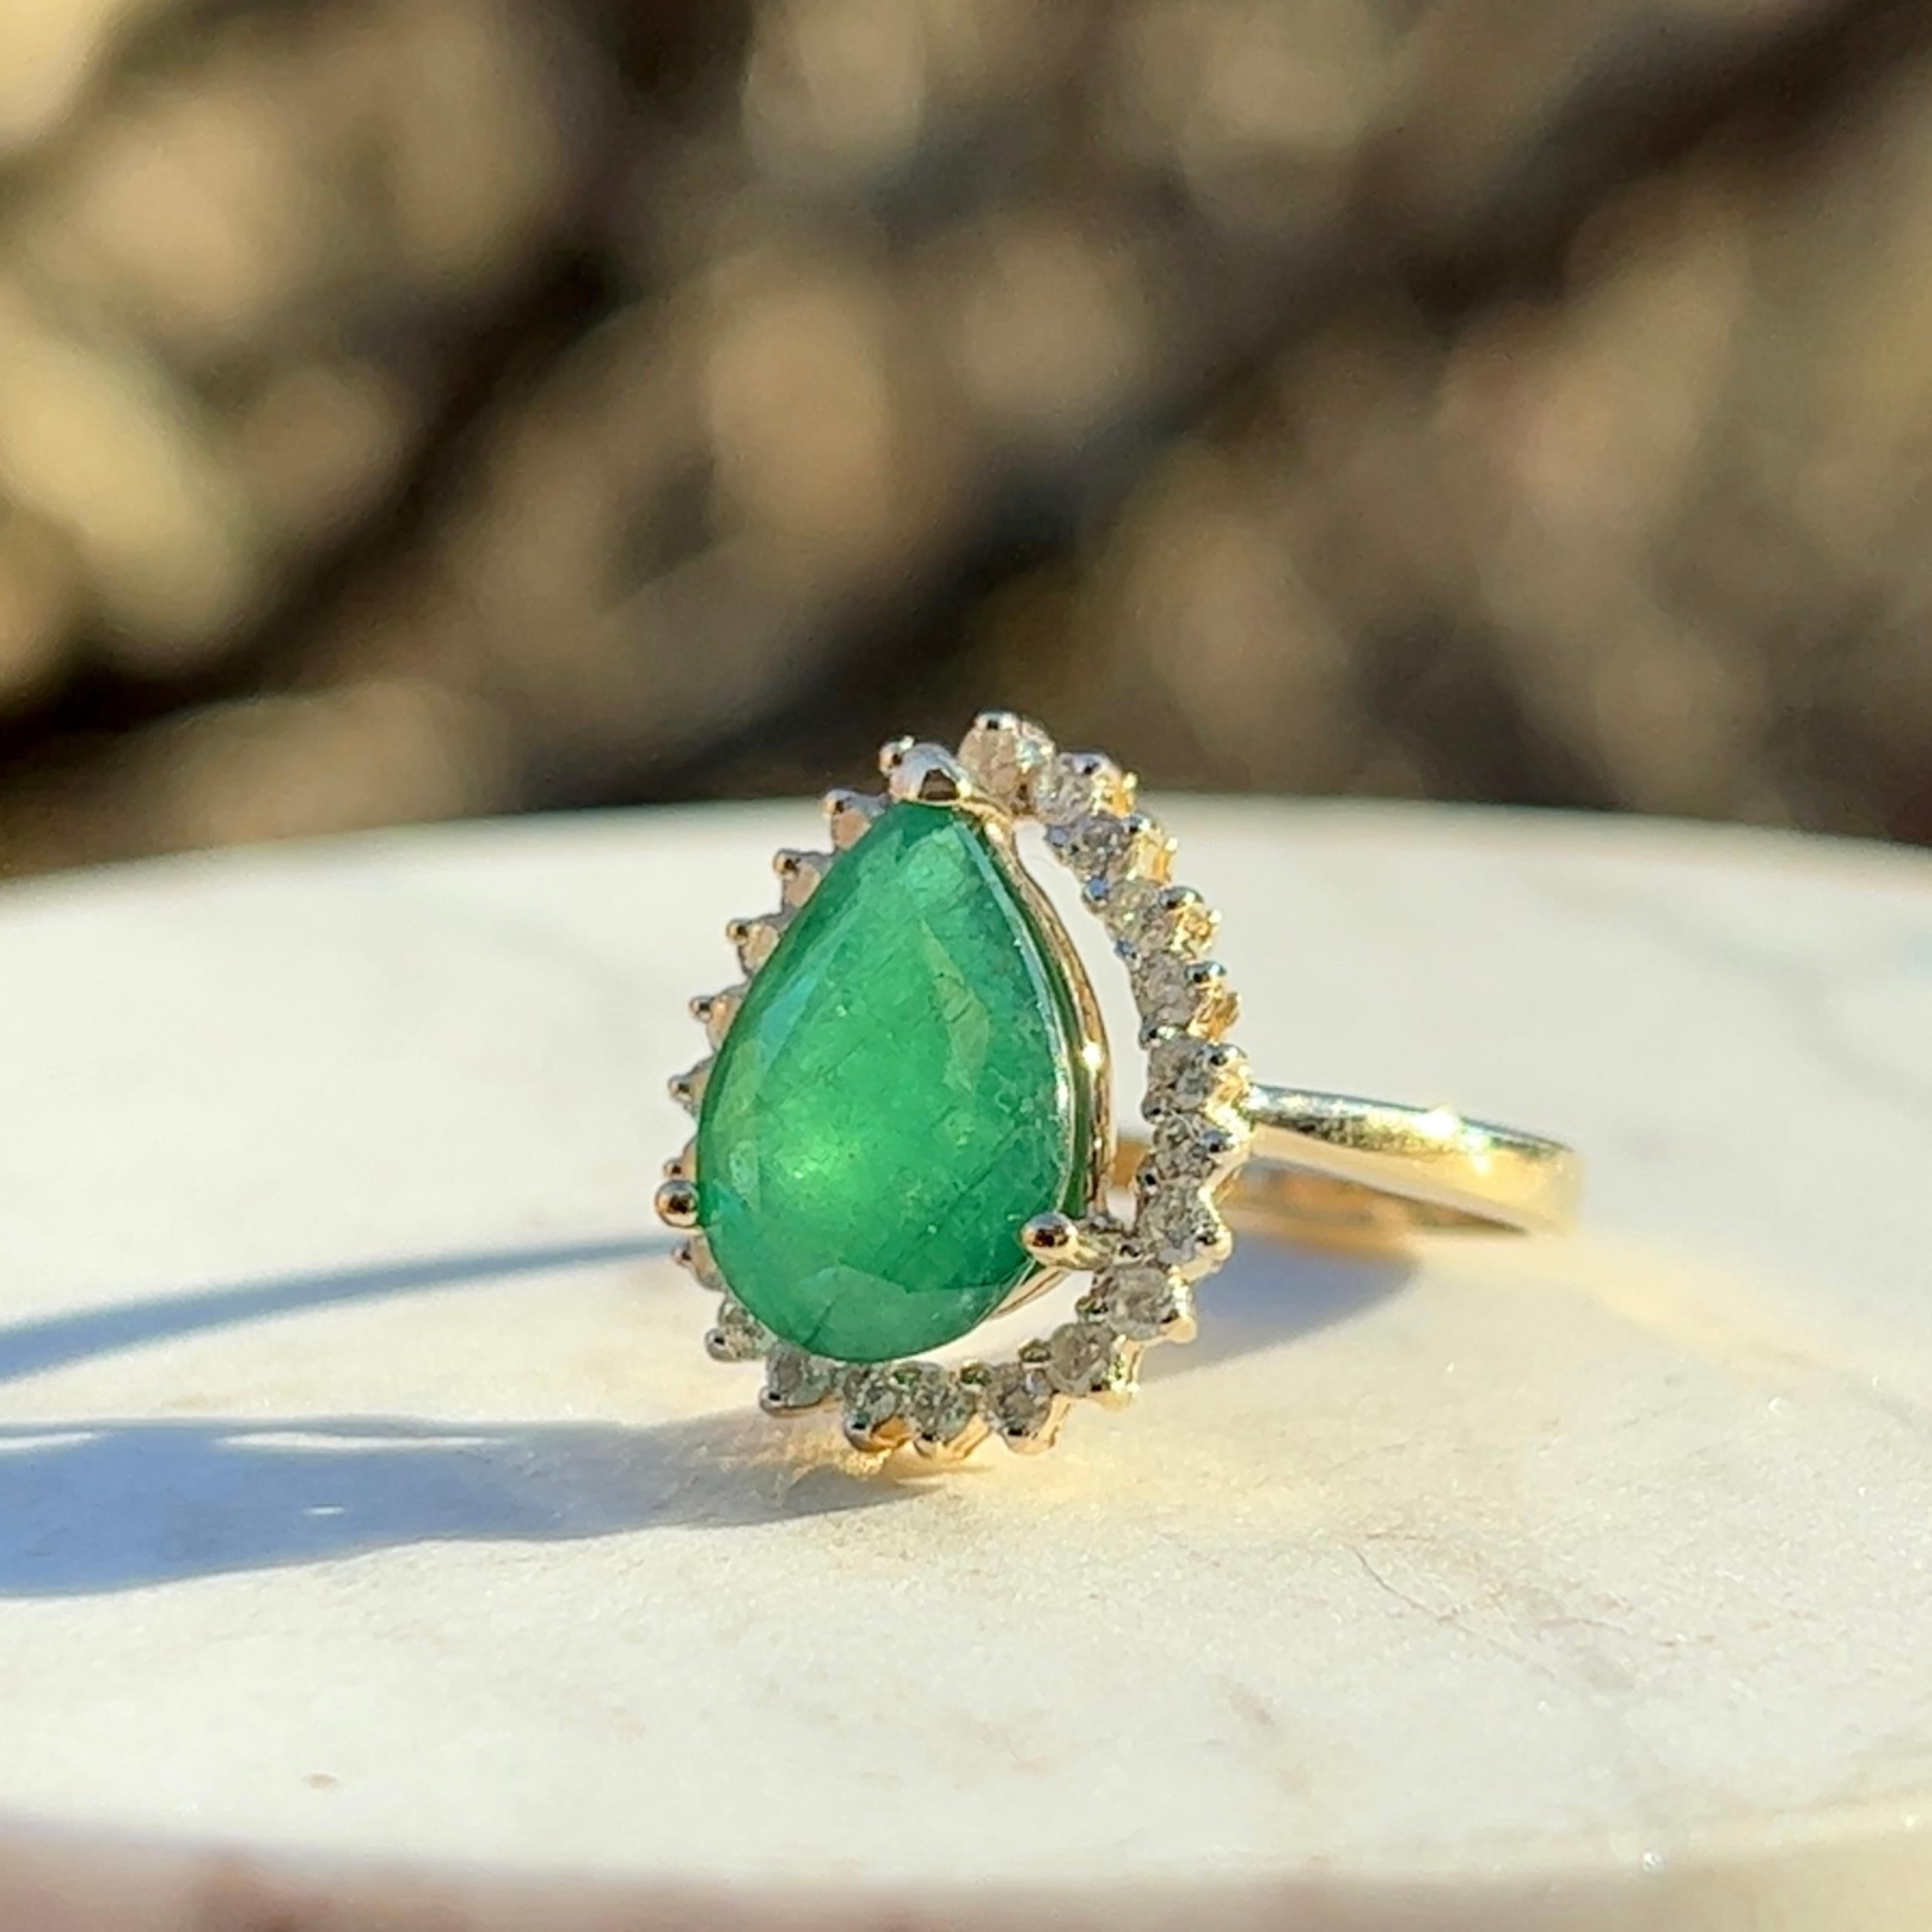 Women's Contemporary Pear Shaped Emerald Diamond Halo Ring in 14K Yellow Gold